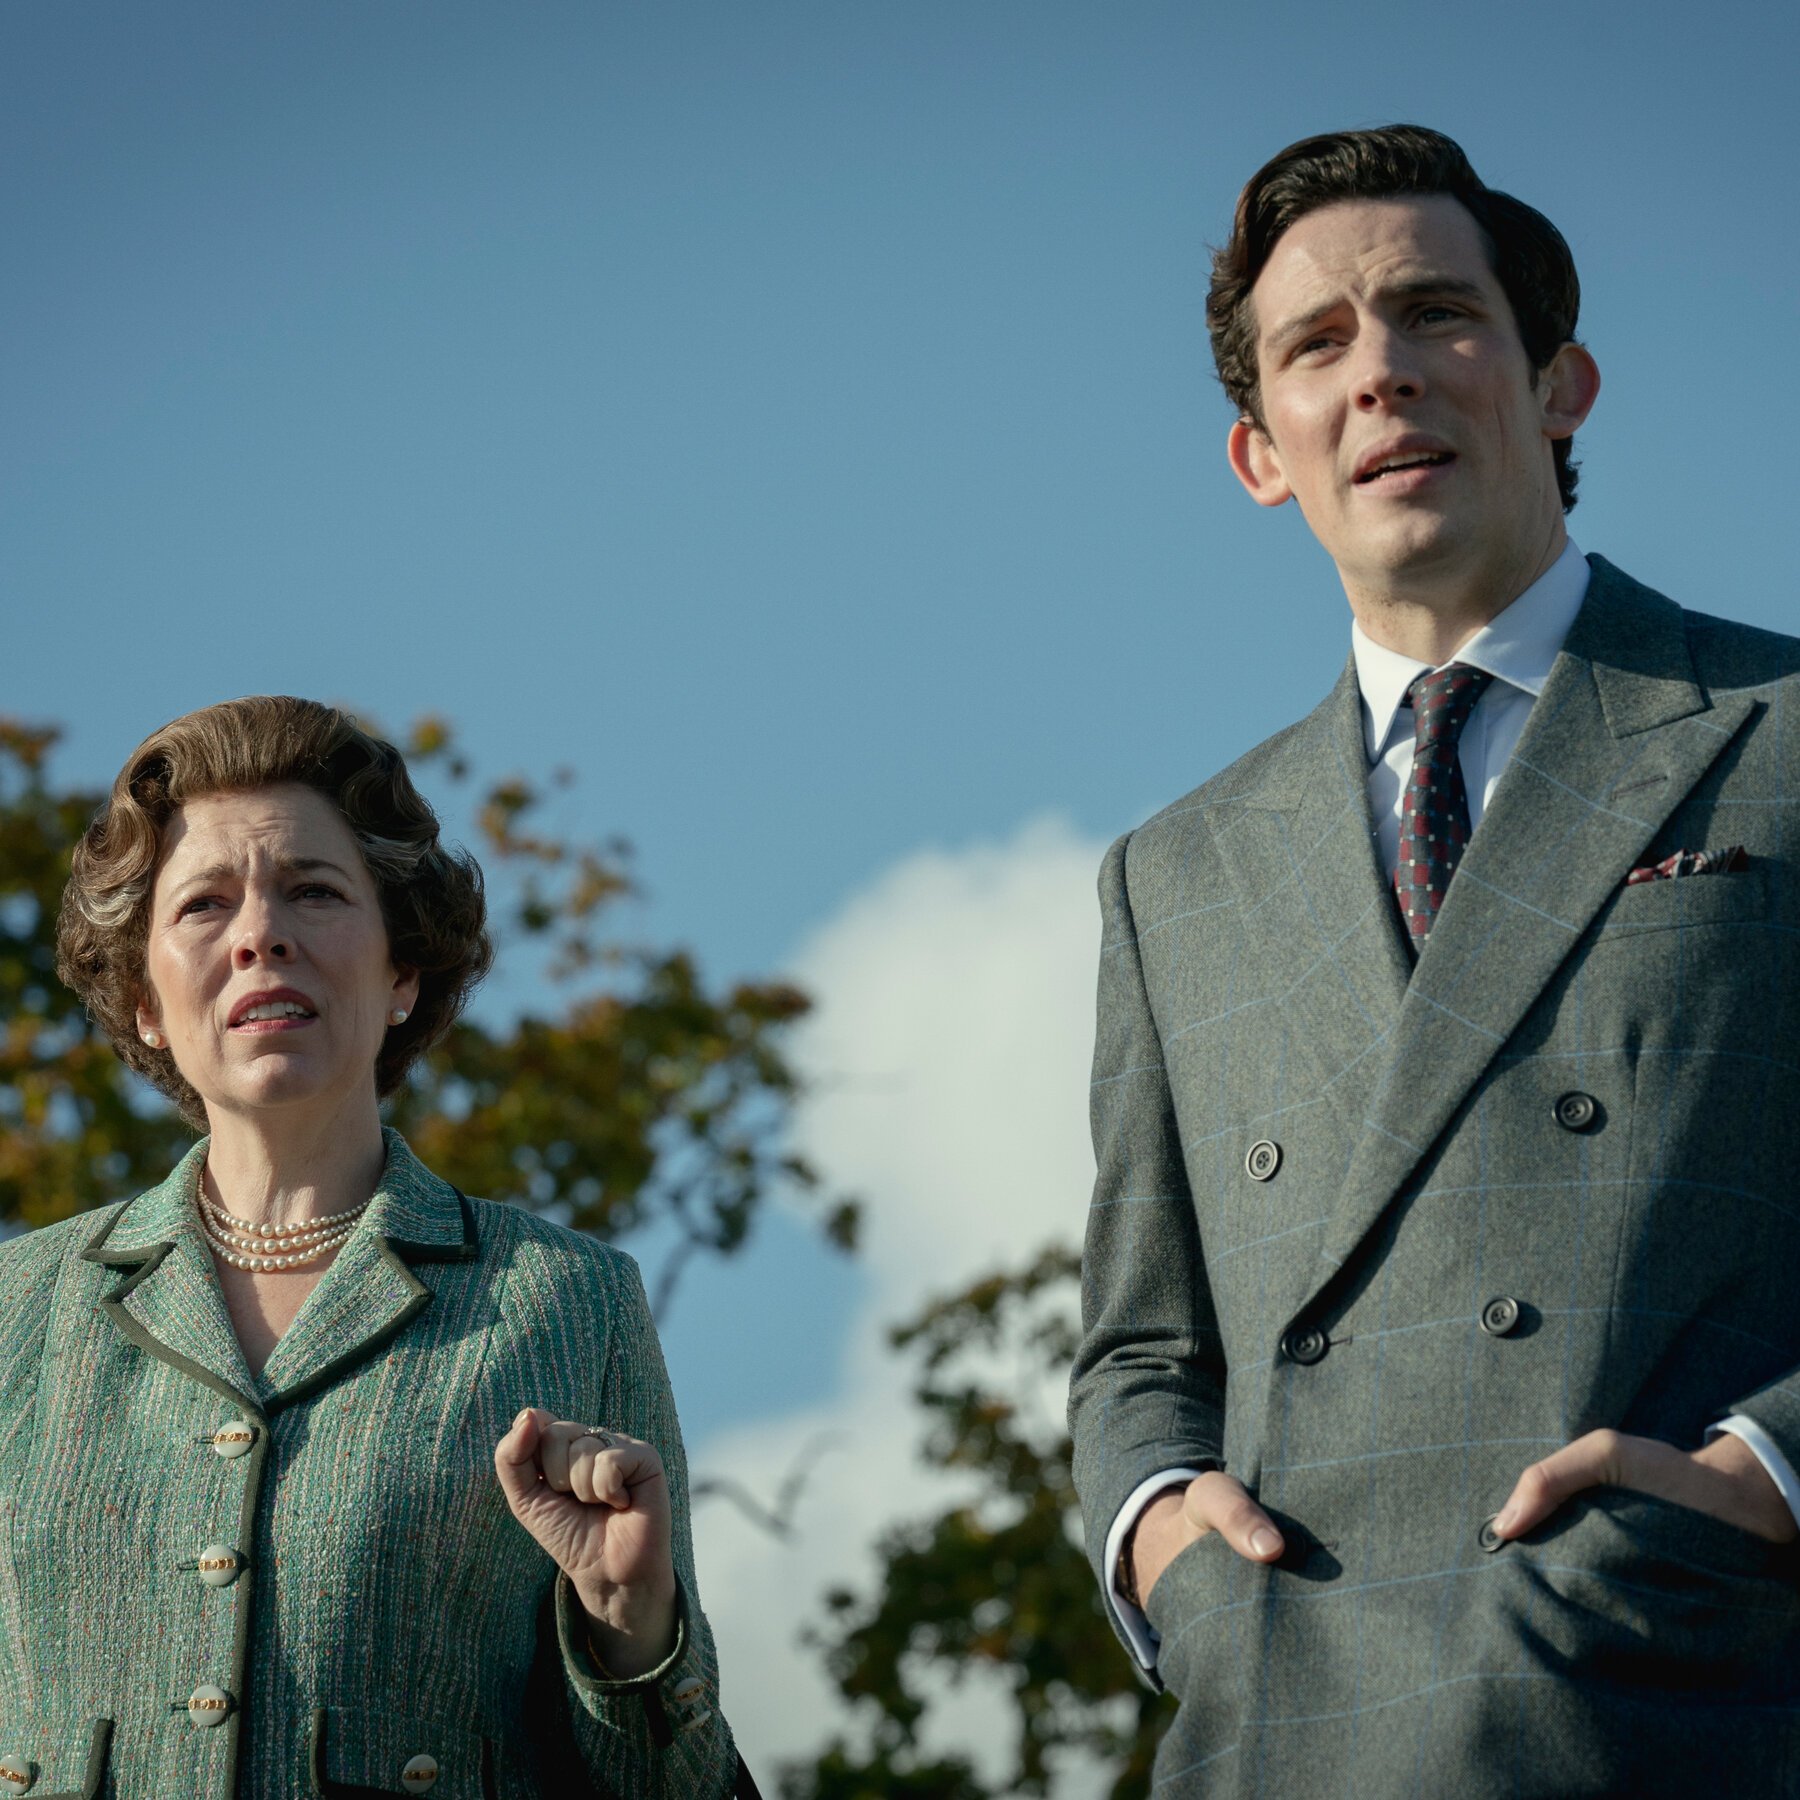 Still from season 4 of The Crown, with the Queen and Charles outdoors